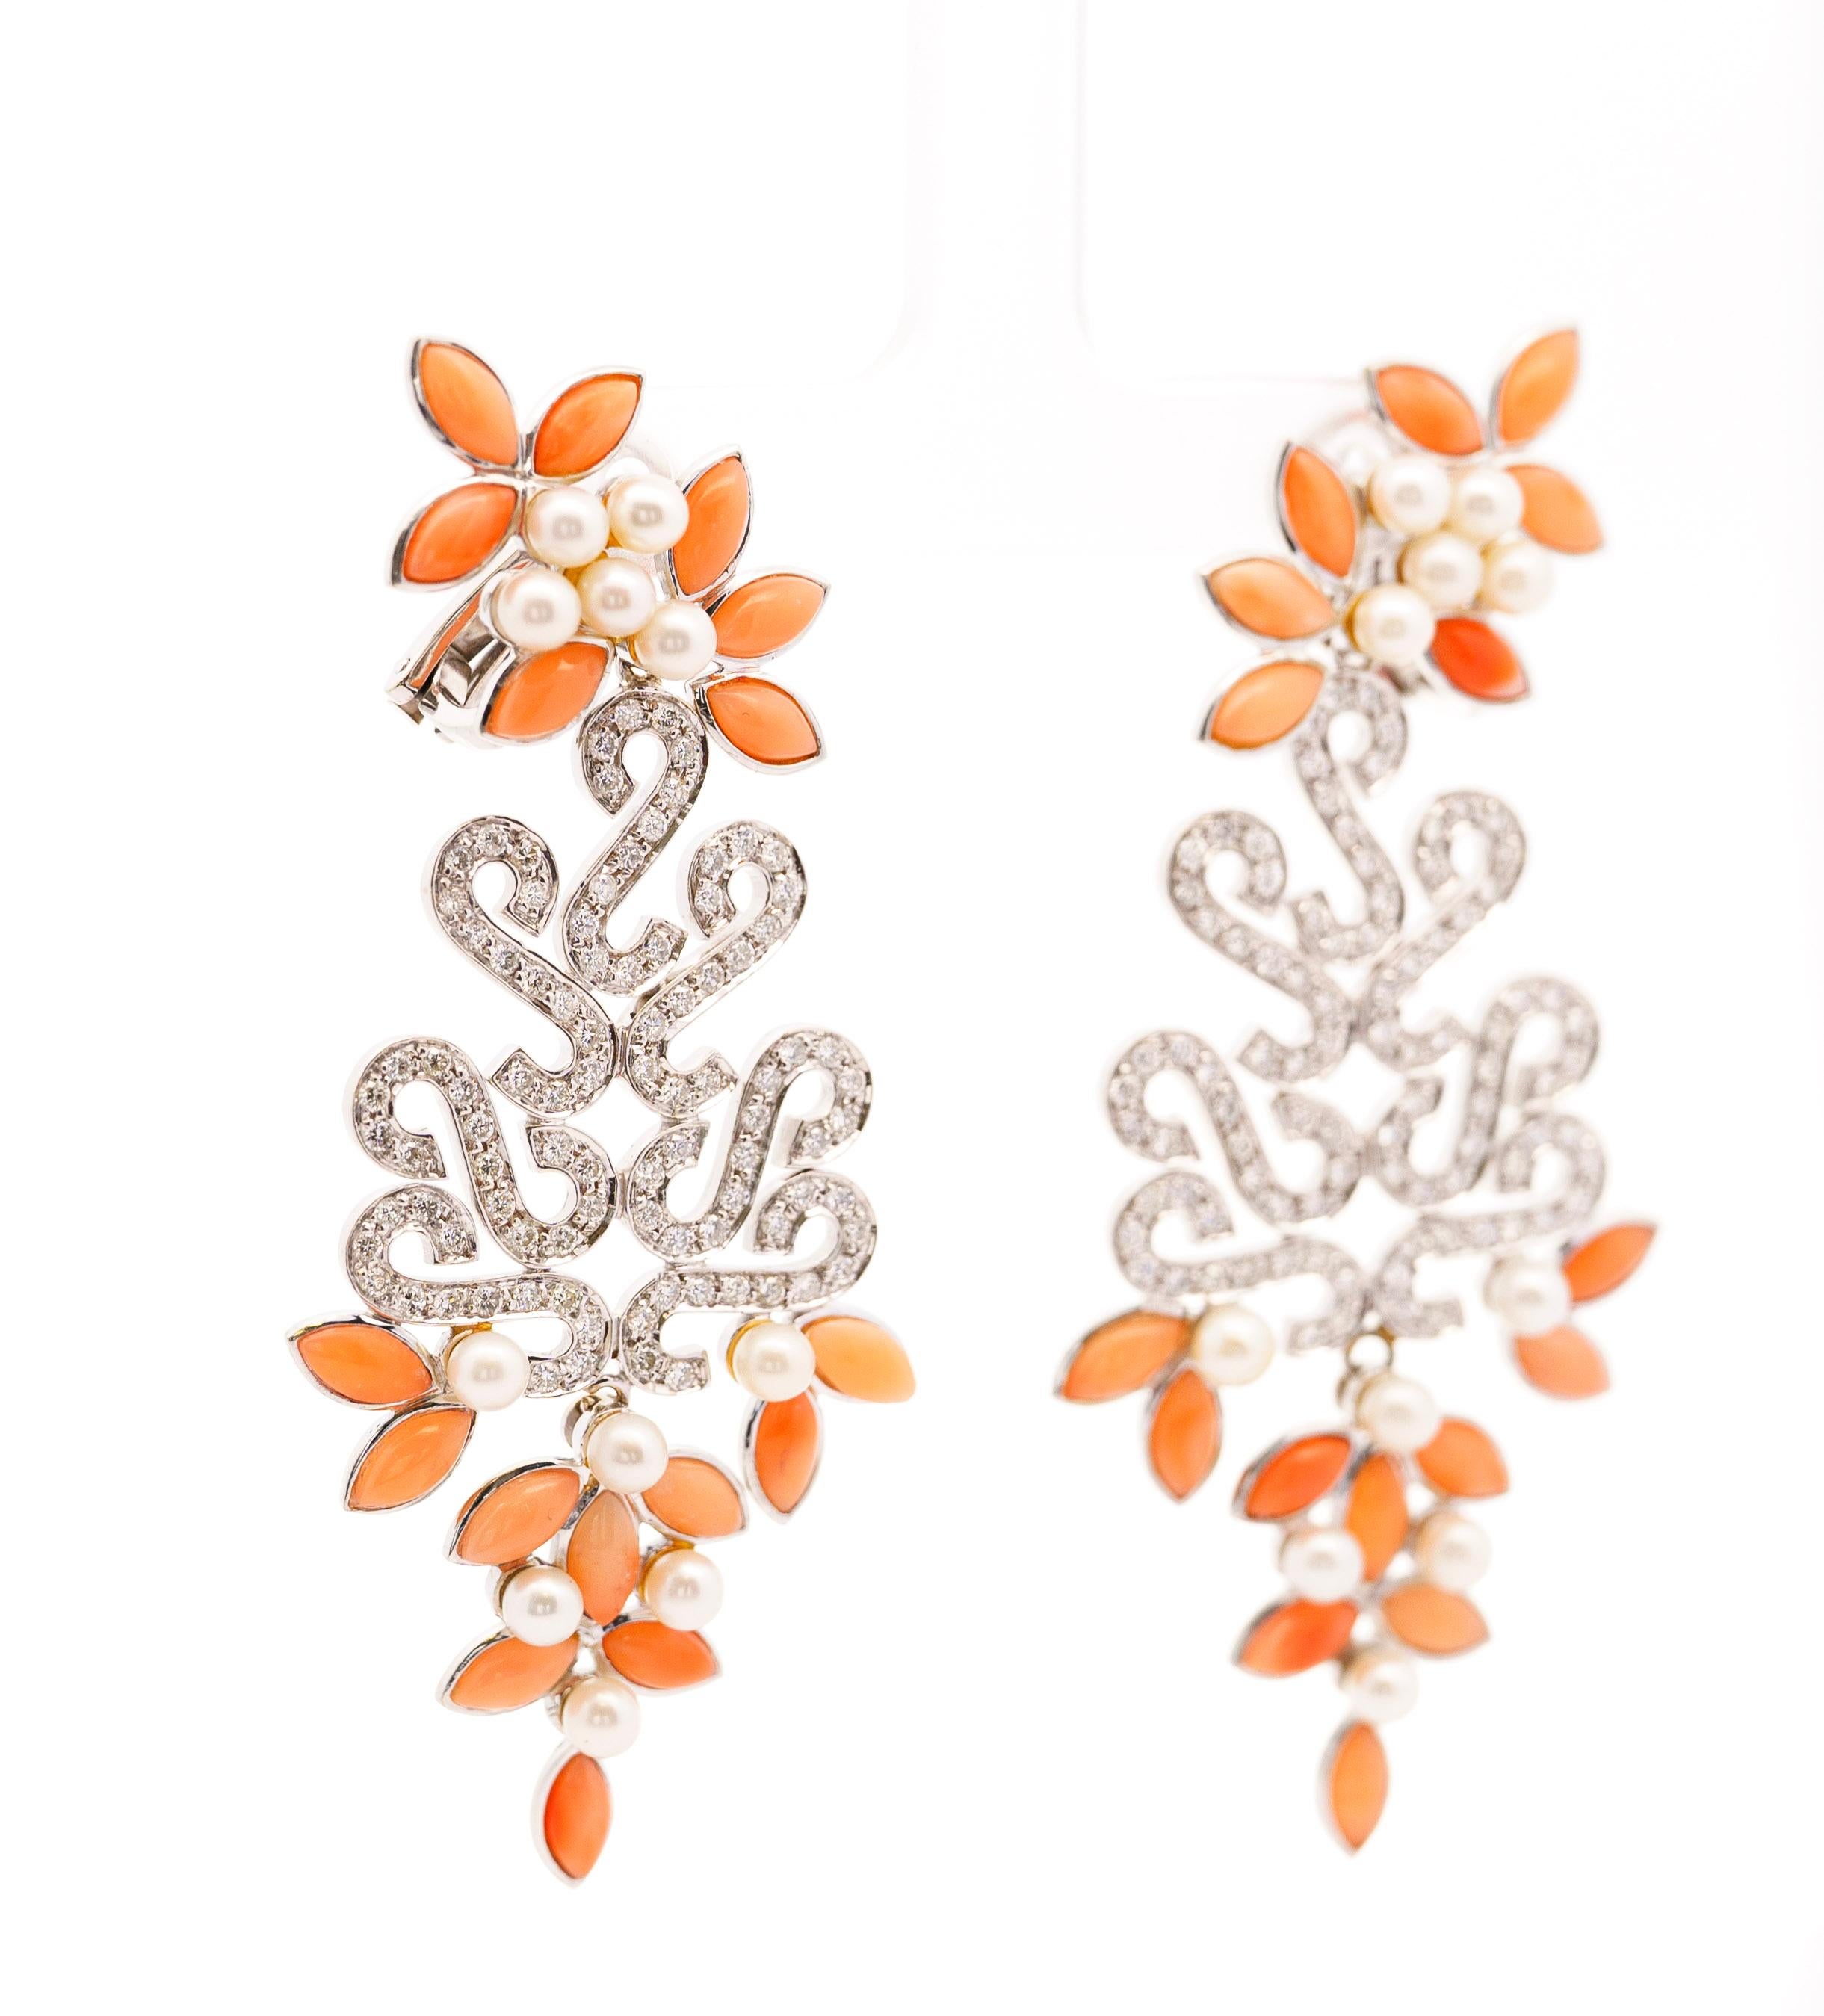 These captivating 3-inch earrings showcase a stunning floral design, crafted in lustrous 18k gold. Marquise-shaped coral pieces framing the sparkling round-cut diamonds, create a unique and eye-catching centerpiece. Delicate pearls add a touch of